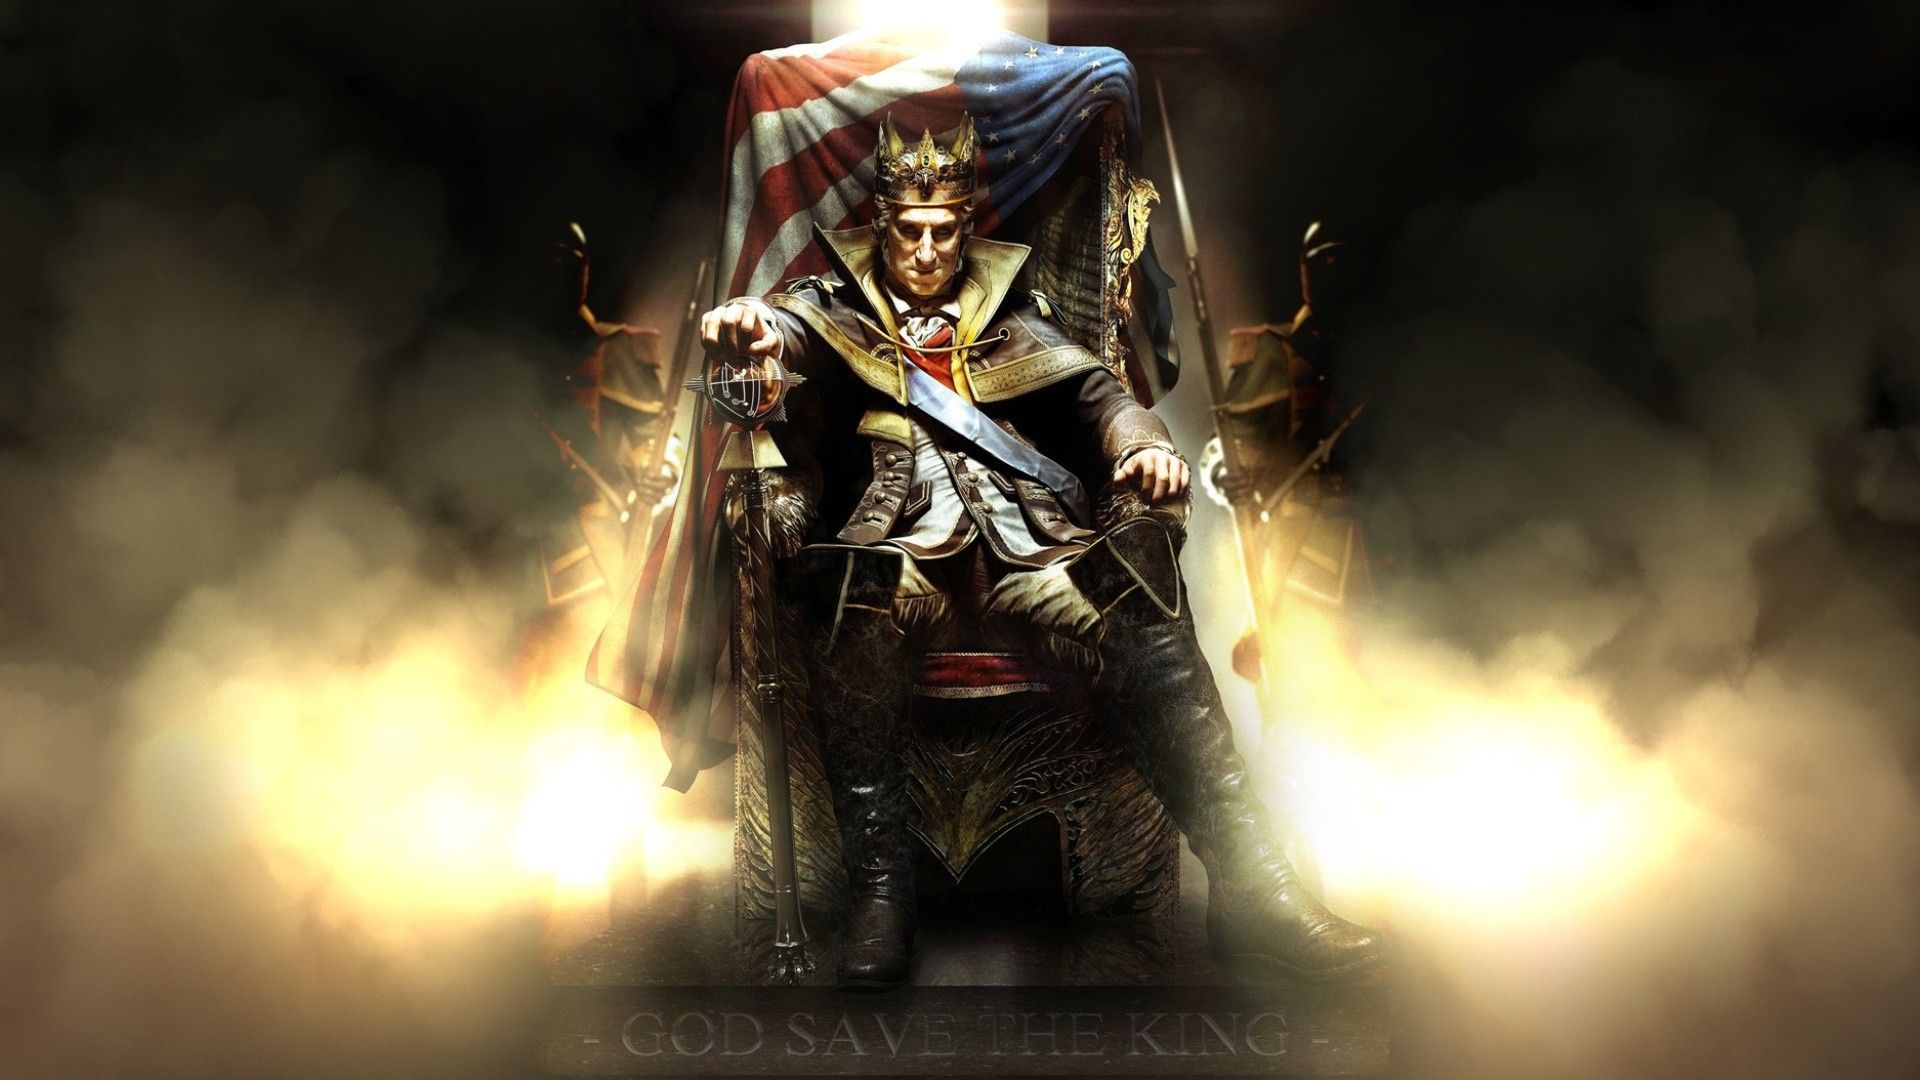 King Throne Wallpapers